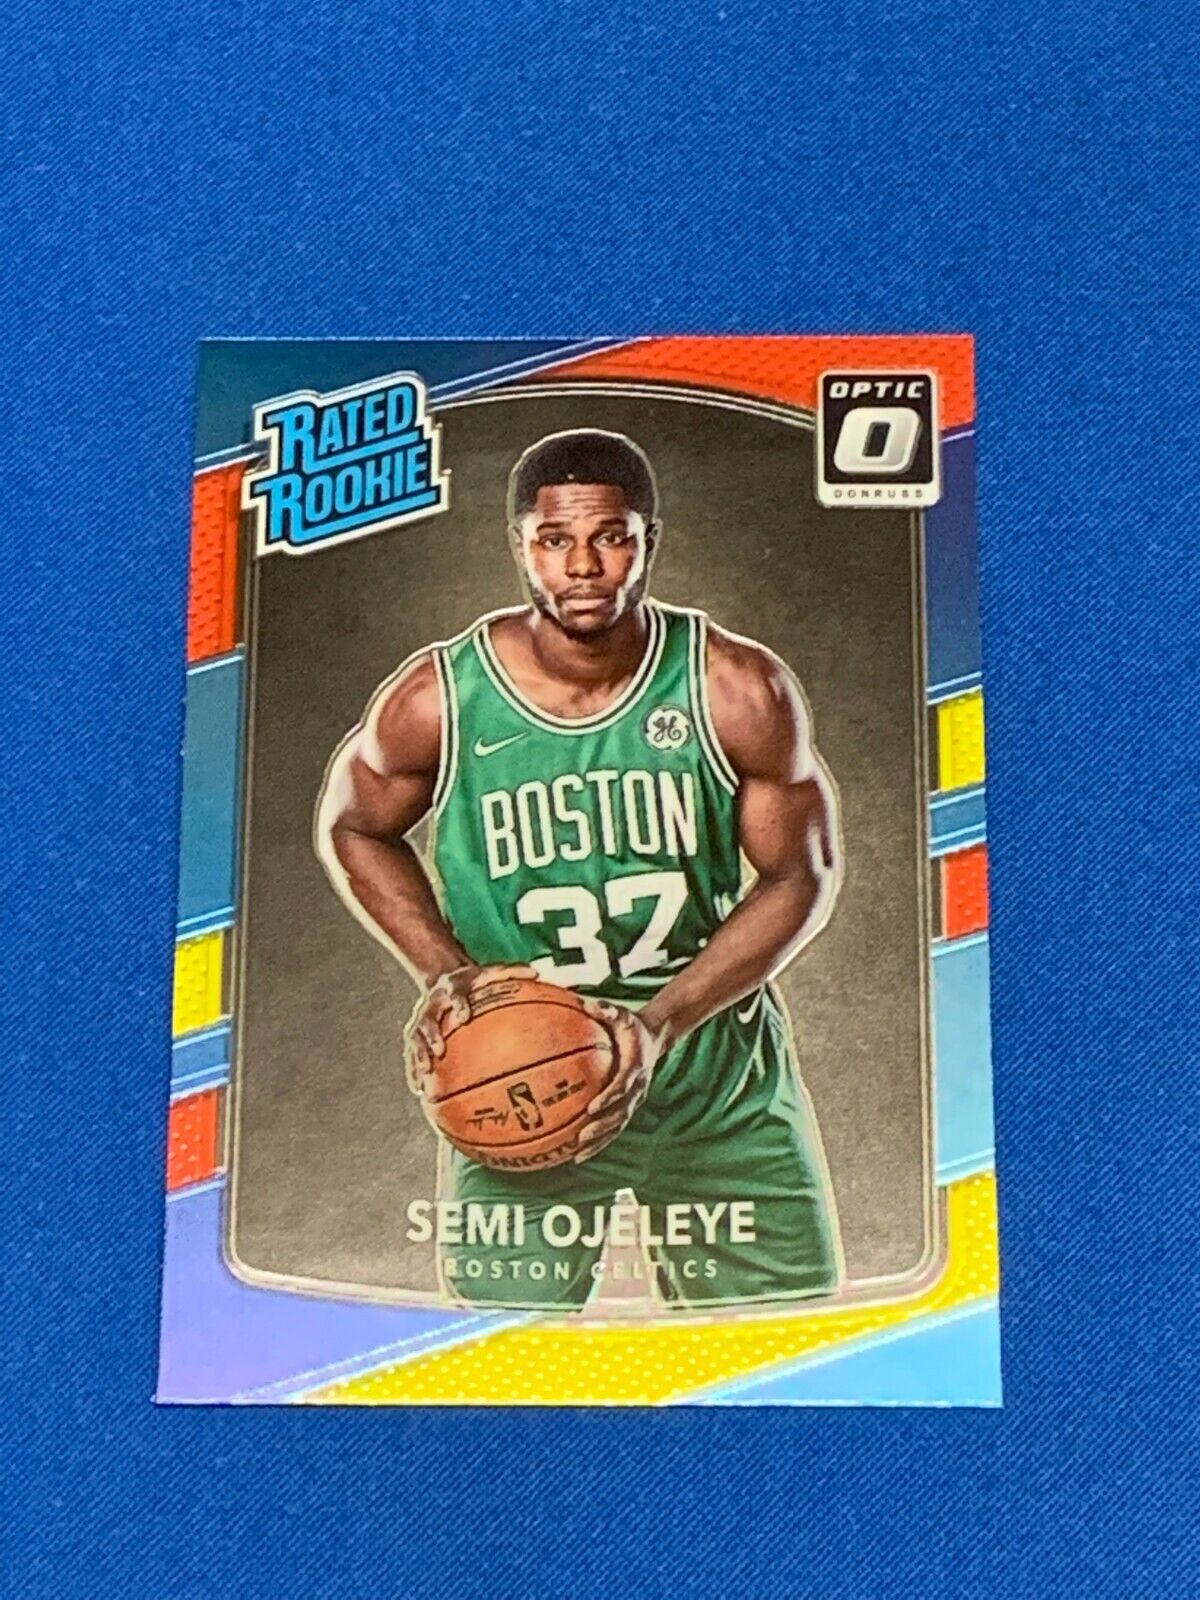 2017-18 Donruss Panini Optic Basketball Rated Rookie Card of Semi Ojeleye!!. rookie card picture